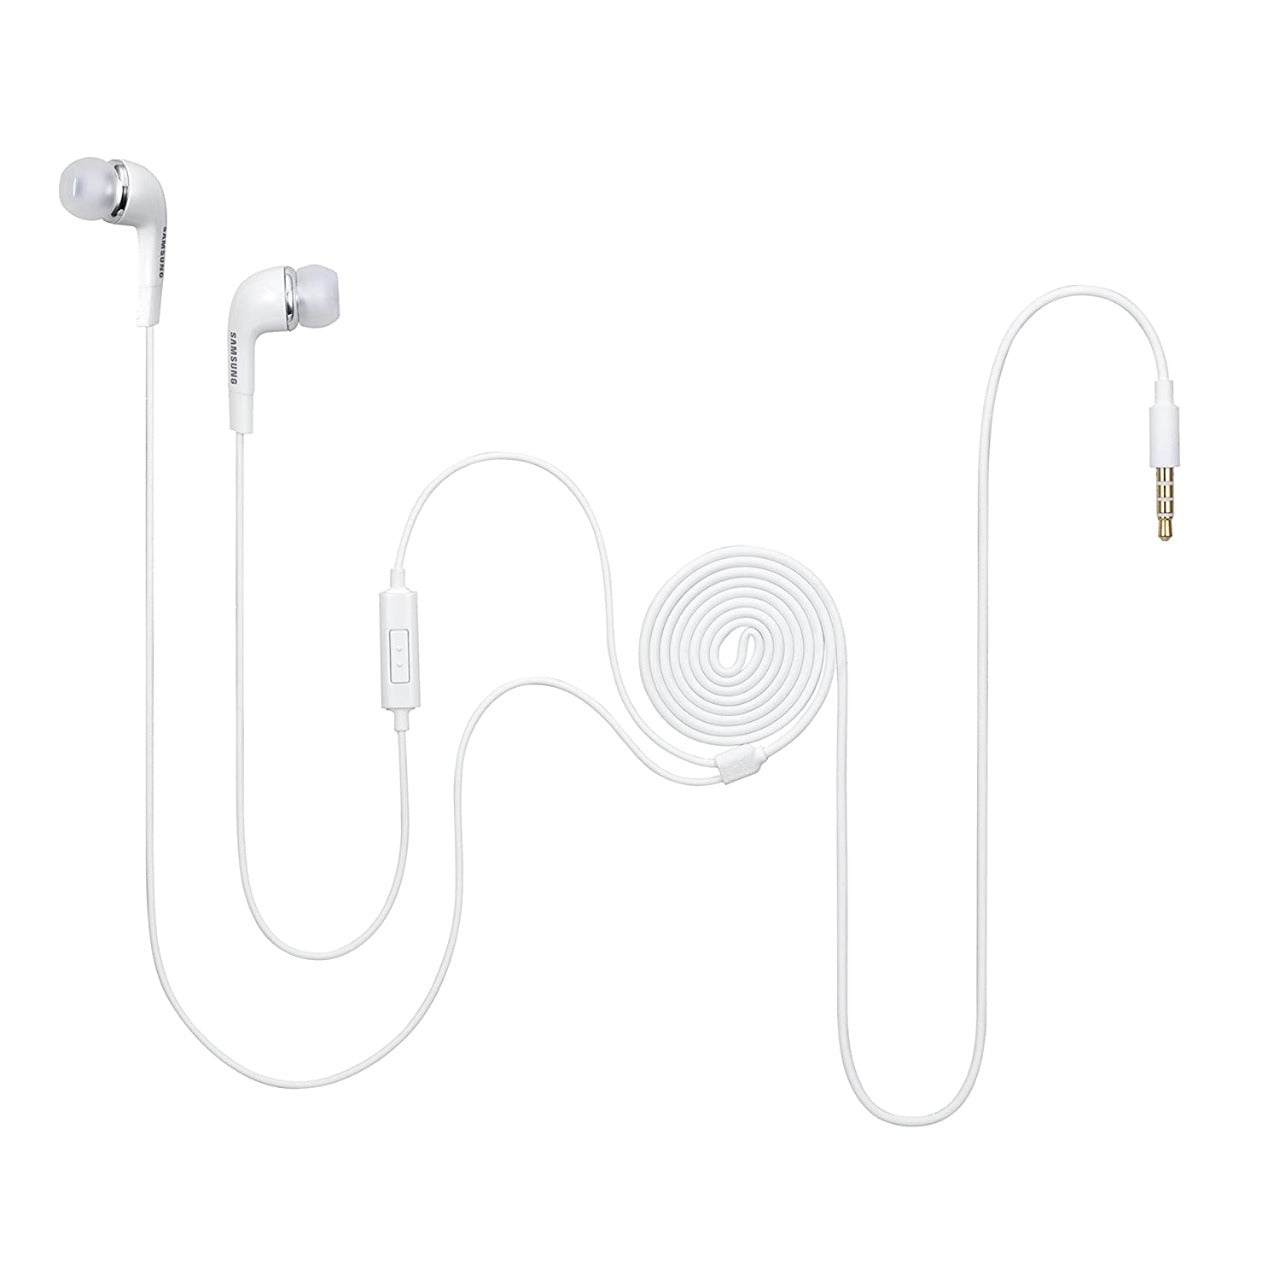 Open Box Unused Samsung Ehs64 Ehs64Avfwecinu Hands-Free Wired In Ear Earphones With Mic With Remote Note (White)